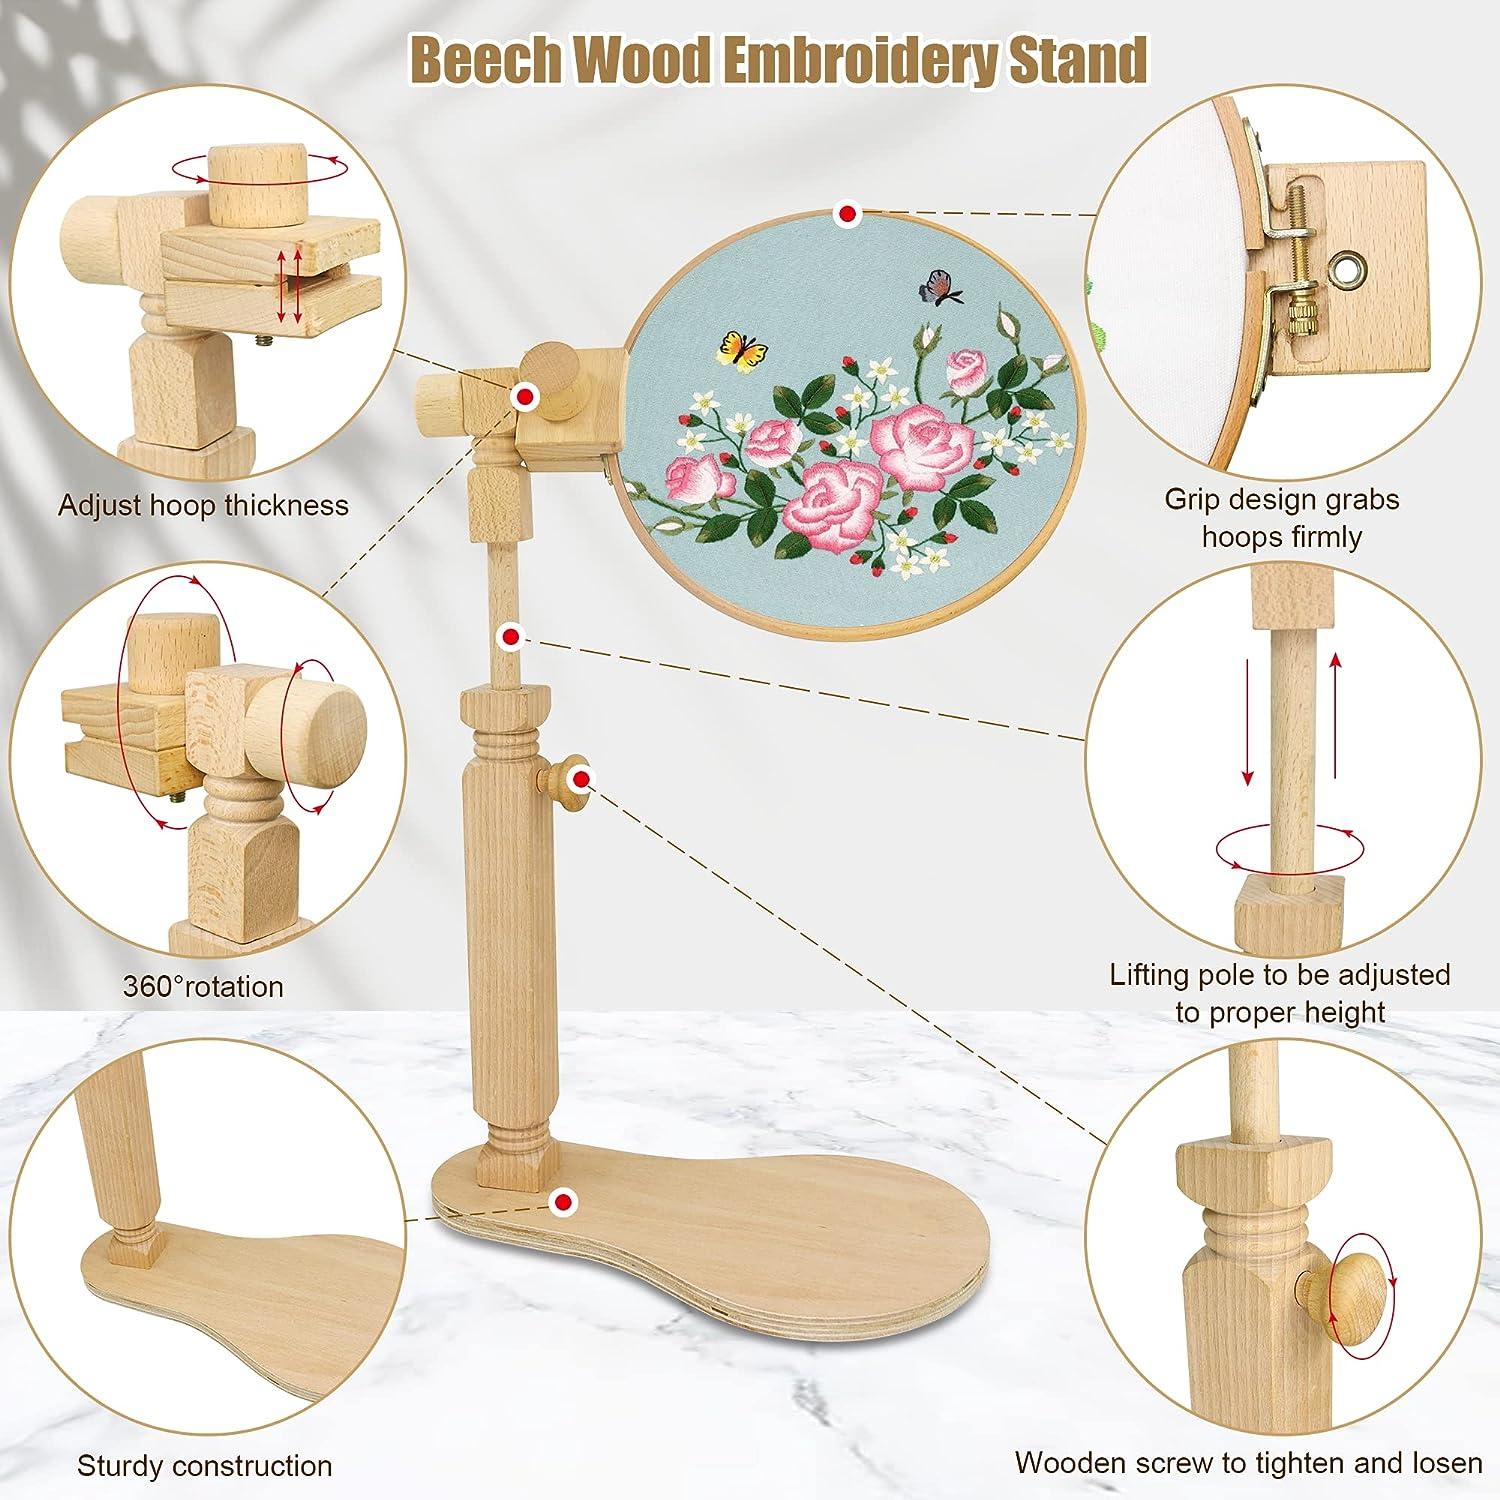 Adjustable Rotated Cross Stitch Wood Embroidery Stand Lap,Hoop